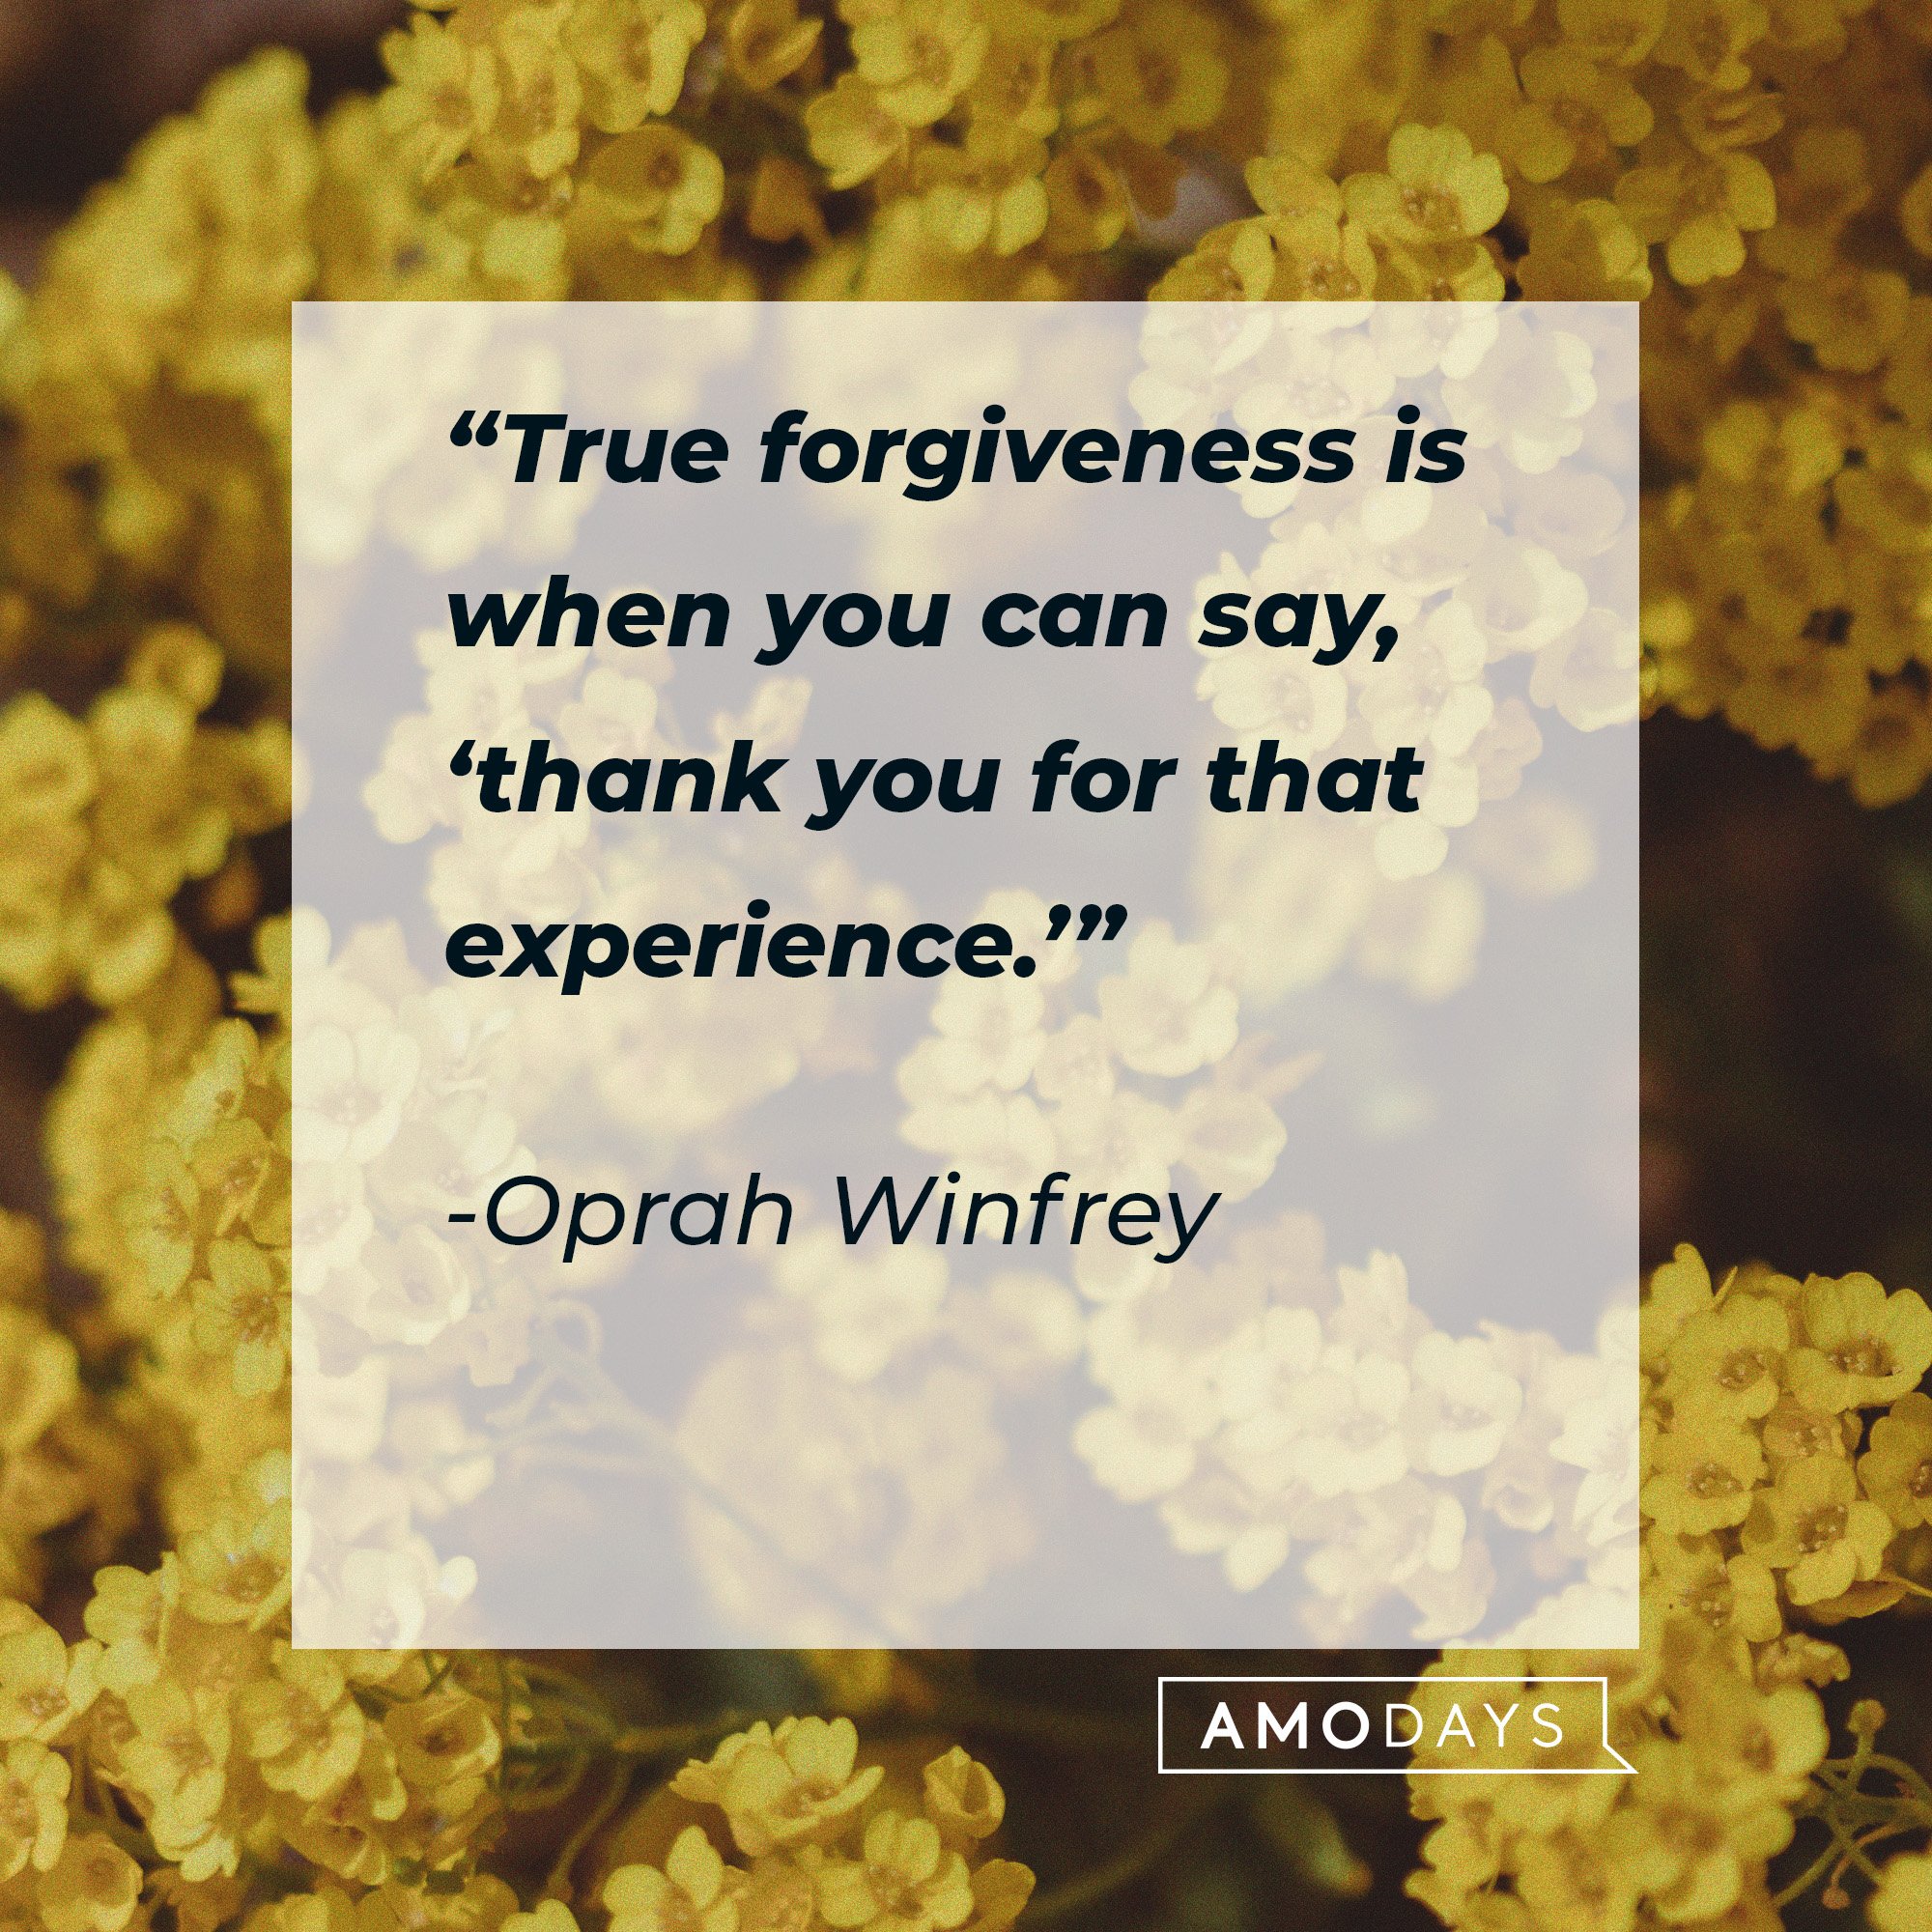 Oprah Winfrey's quote: “True forgiveness is when you can say, ‘thank you for that experience.’” | Image: AmoDays